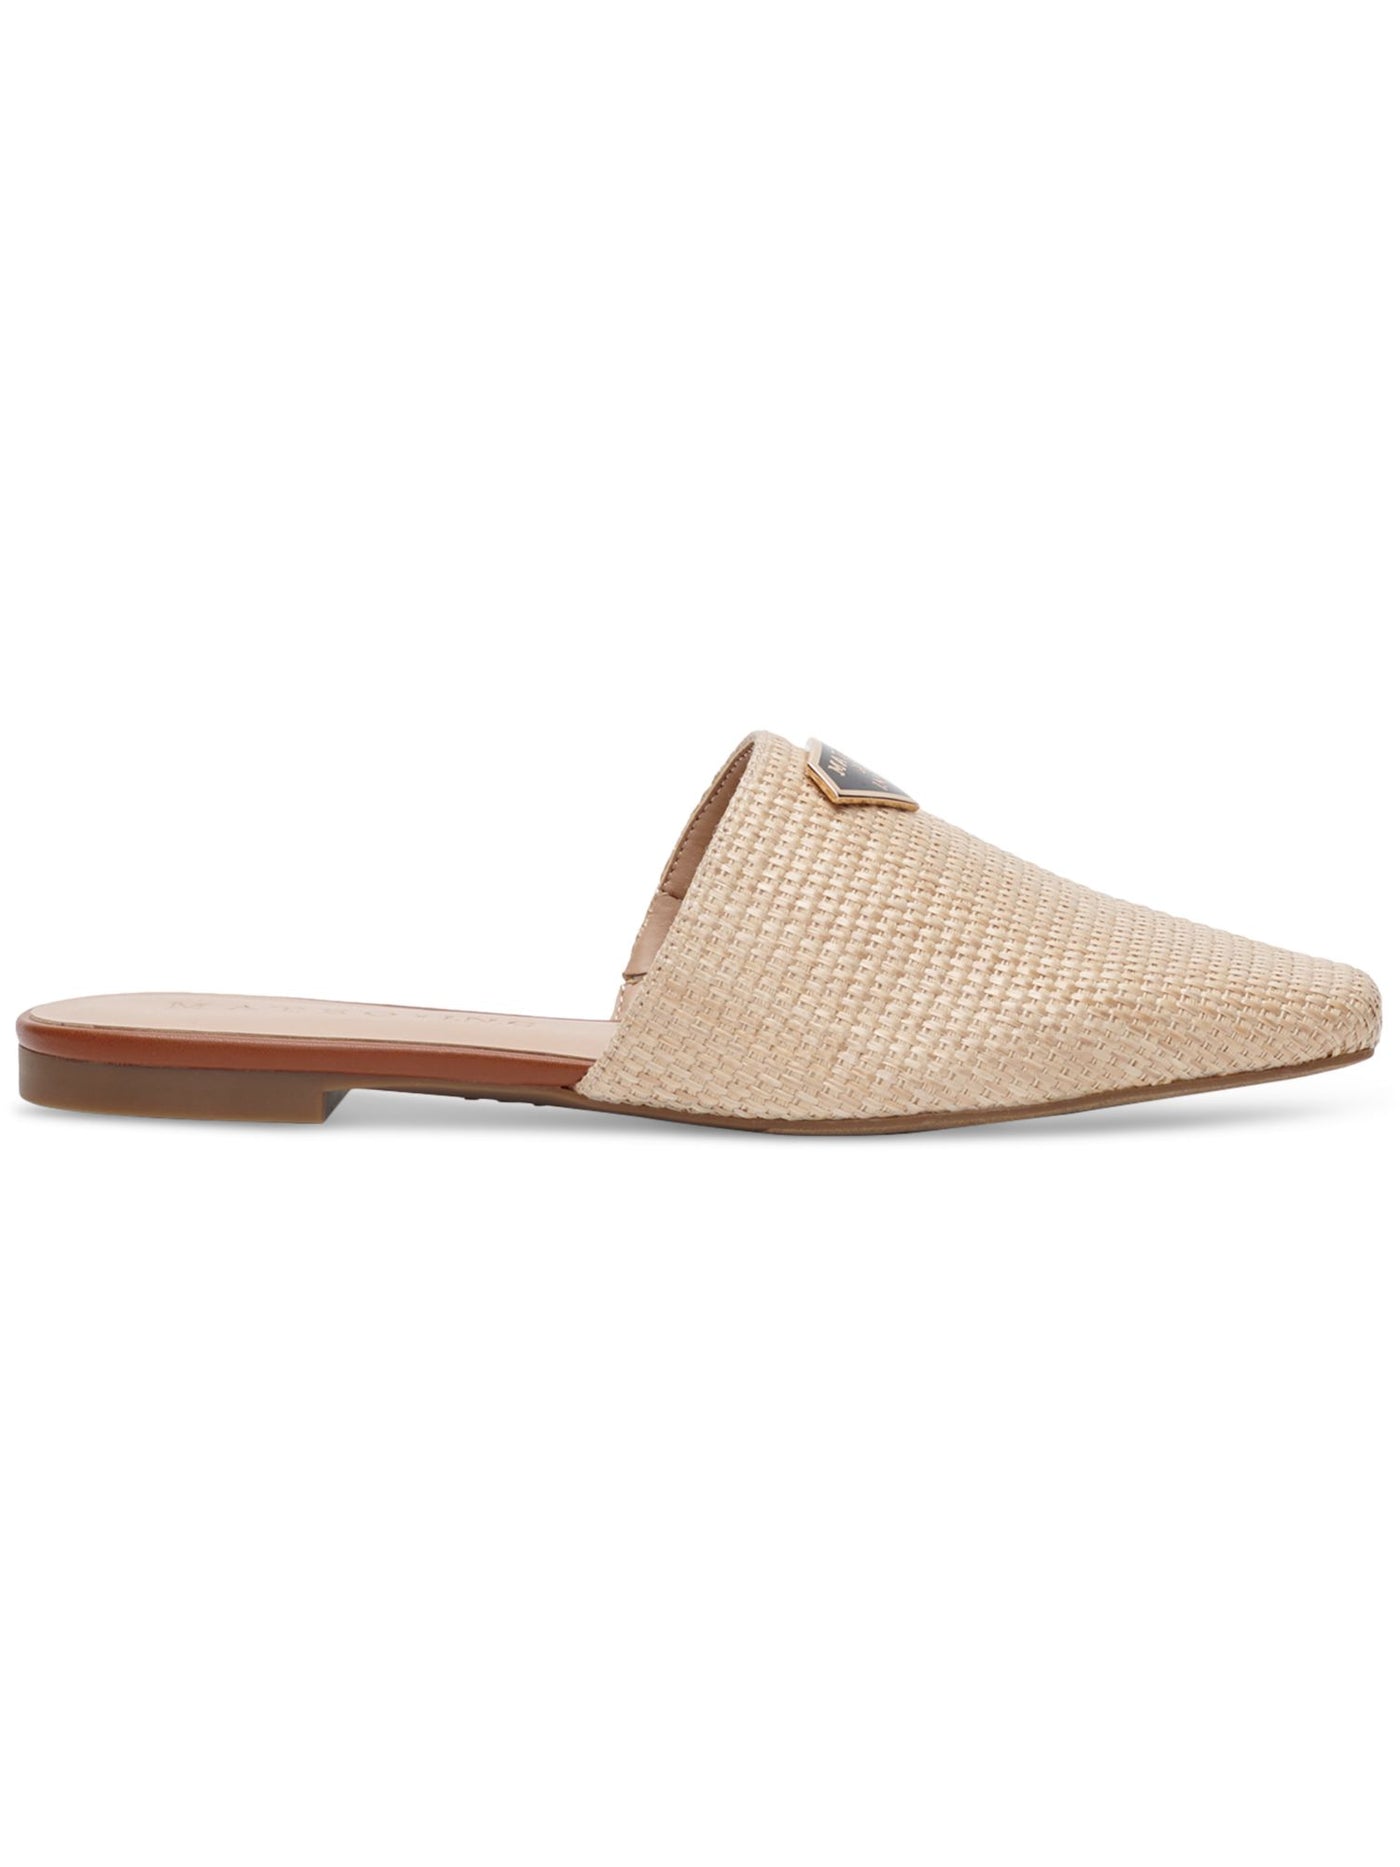 MATEO BY INC Womens Beige Woven Goring The Negril Square Toe Slip On Mules 9.5 M